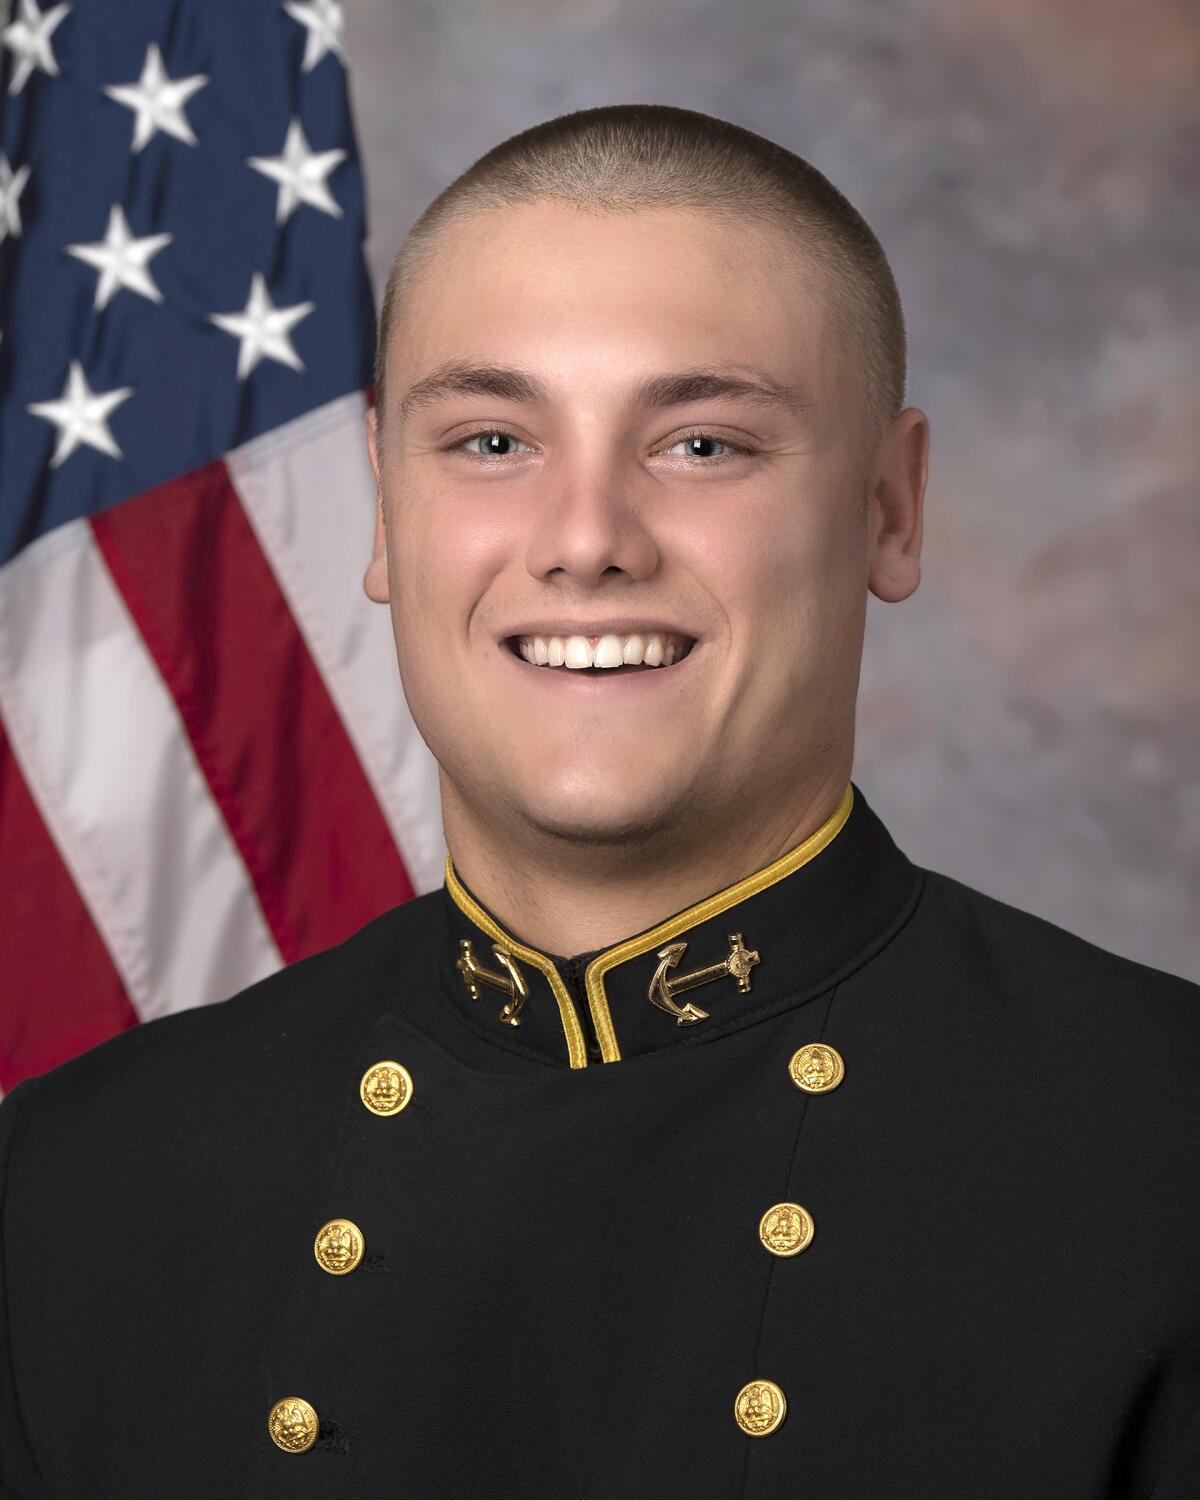 Laguna Beach native Cole McKechnie has been inducted into the Naval Academy's class of 2025.